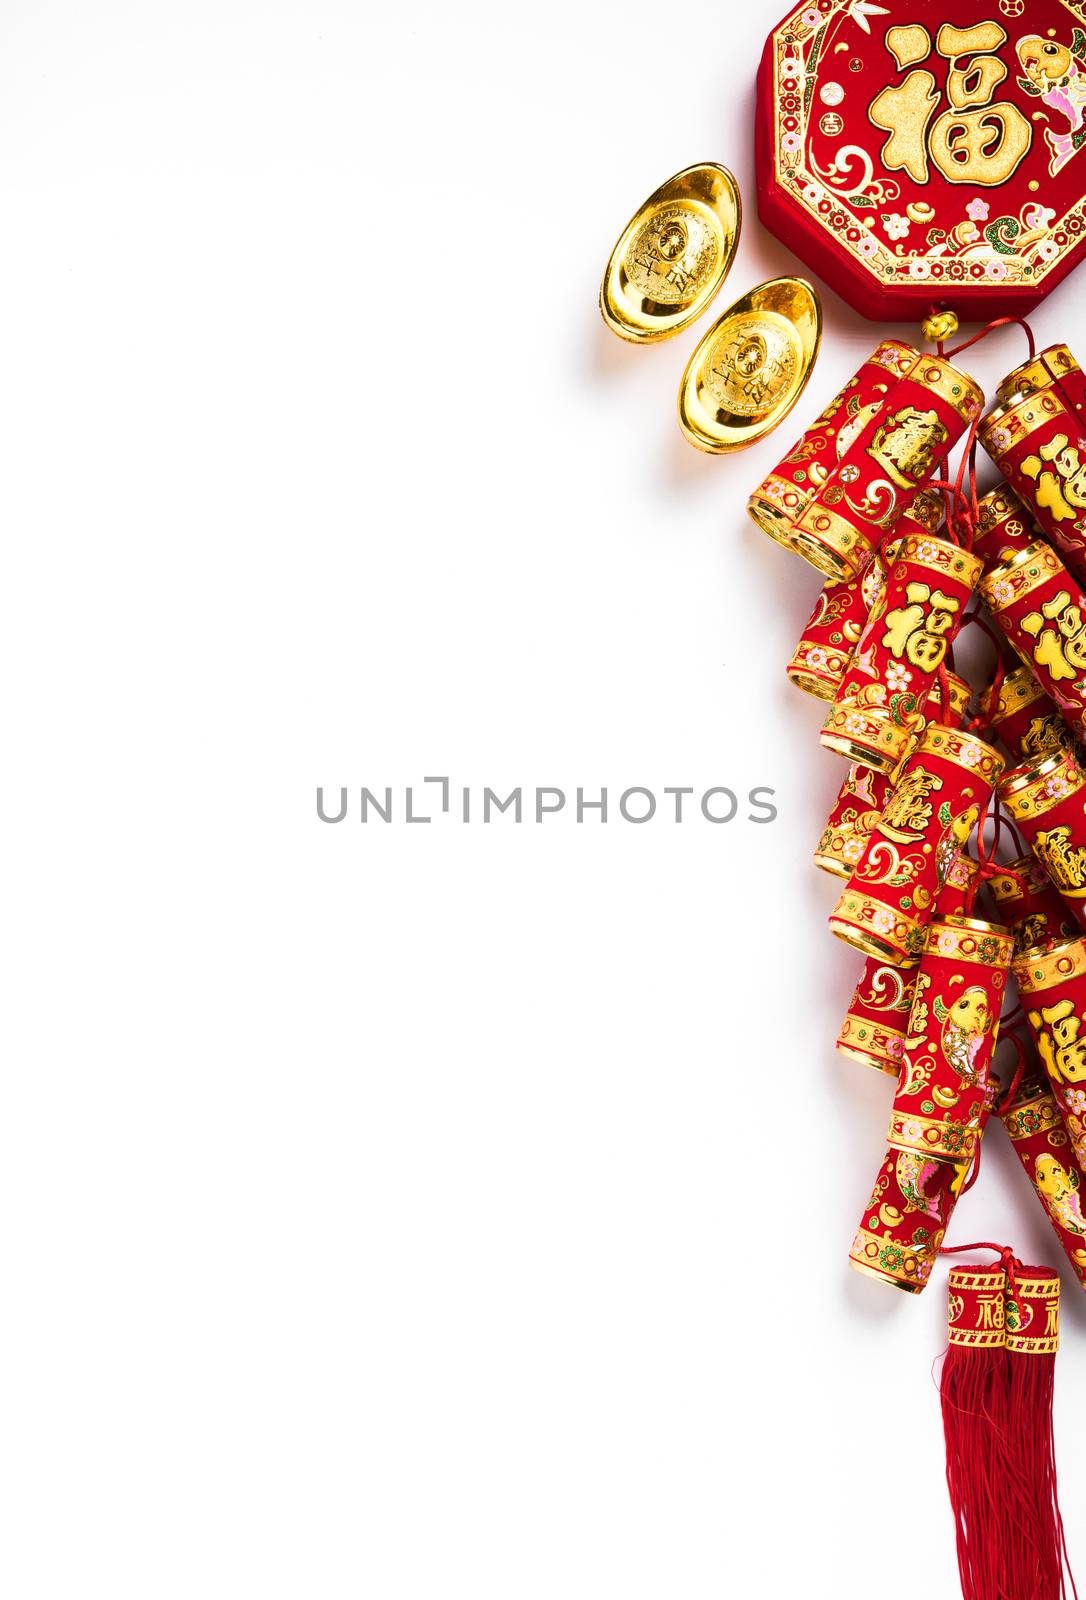 The Chinese new year festival, Top view flat lay happy Chinese new year or lunar new year decorations celebration with copy space on white background (Chinese character "fu" meaning fortune good luck)